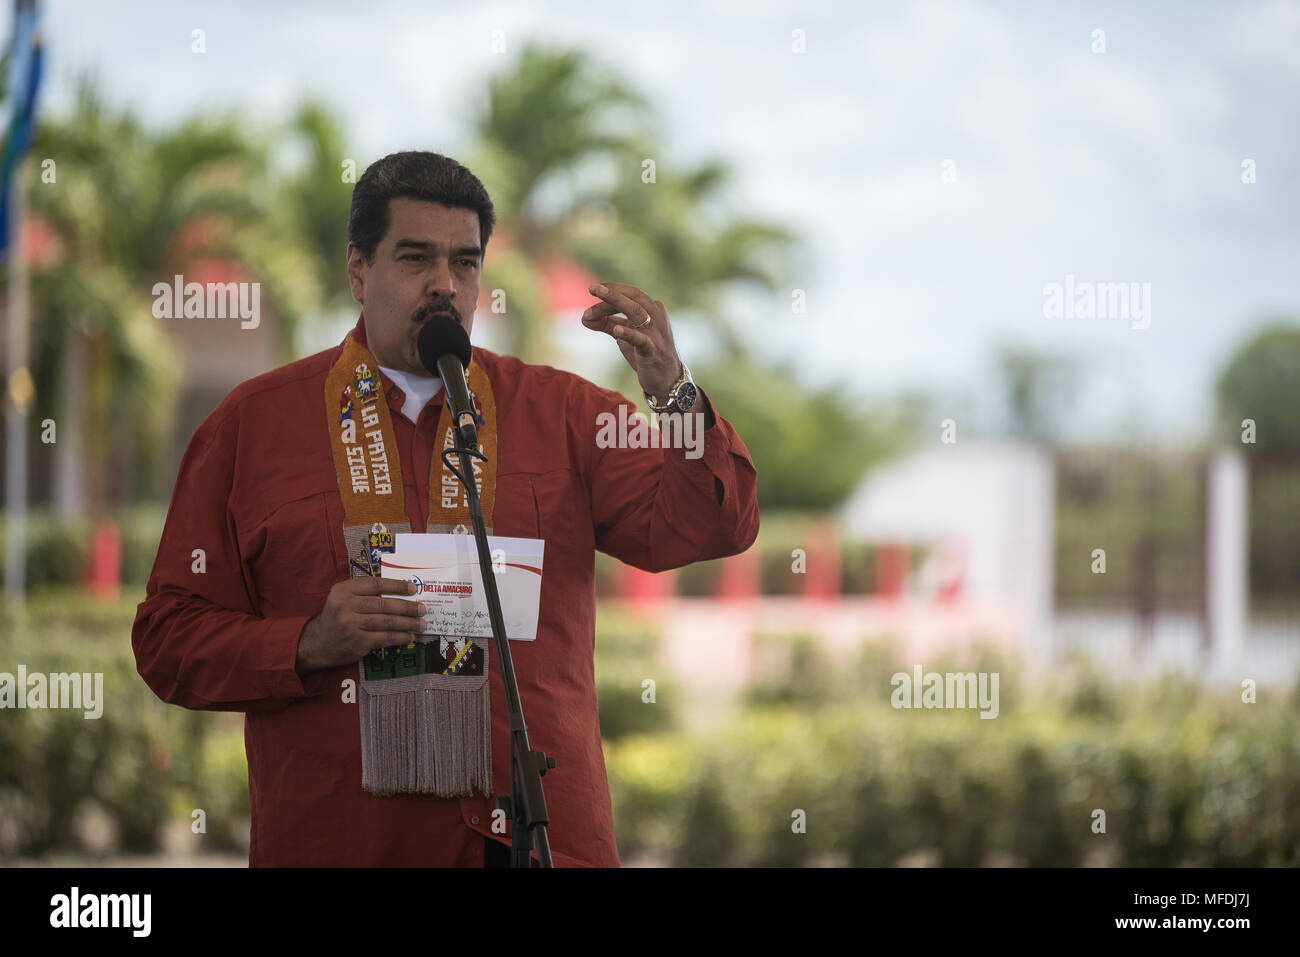 Venezuela, Tucupita, 24th april 2018. The president of Venezuela, Nicolás Maduro speaks at the airport in the city of Tucupita, capital of the state of Delta Amacuro (east), where he arrived to participate in a campaign event. Marcos Salgado / Alamy News Stock Photo